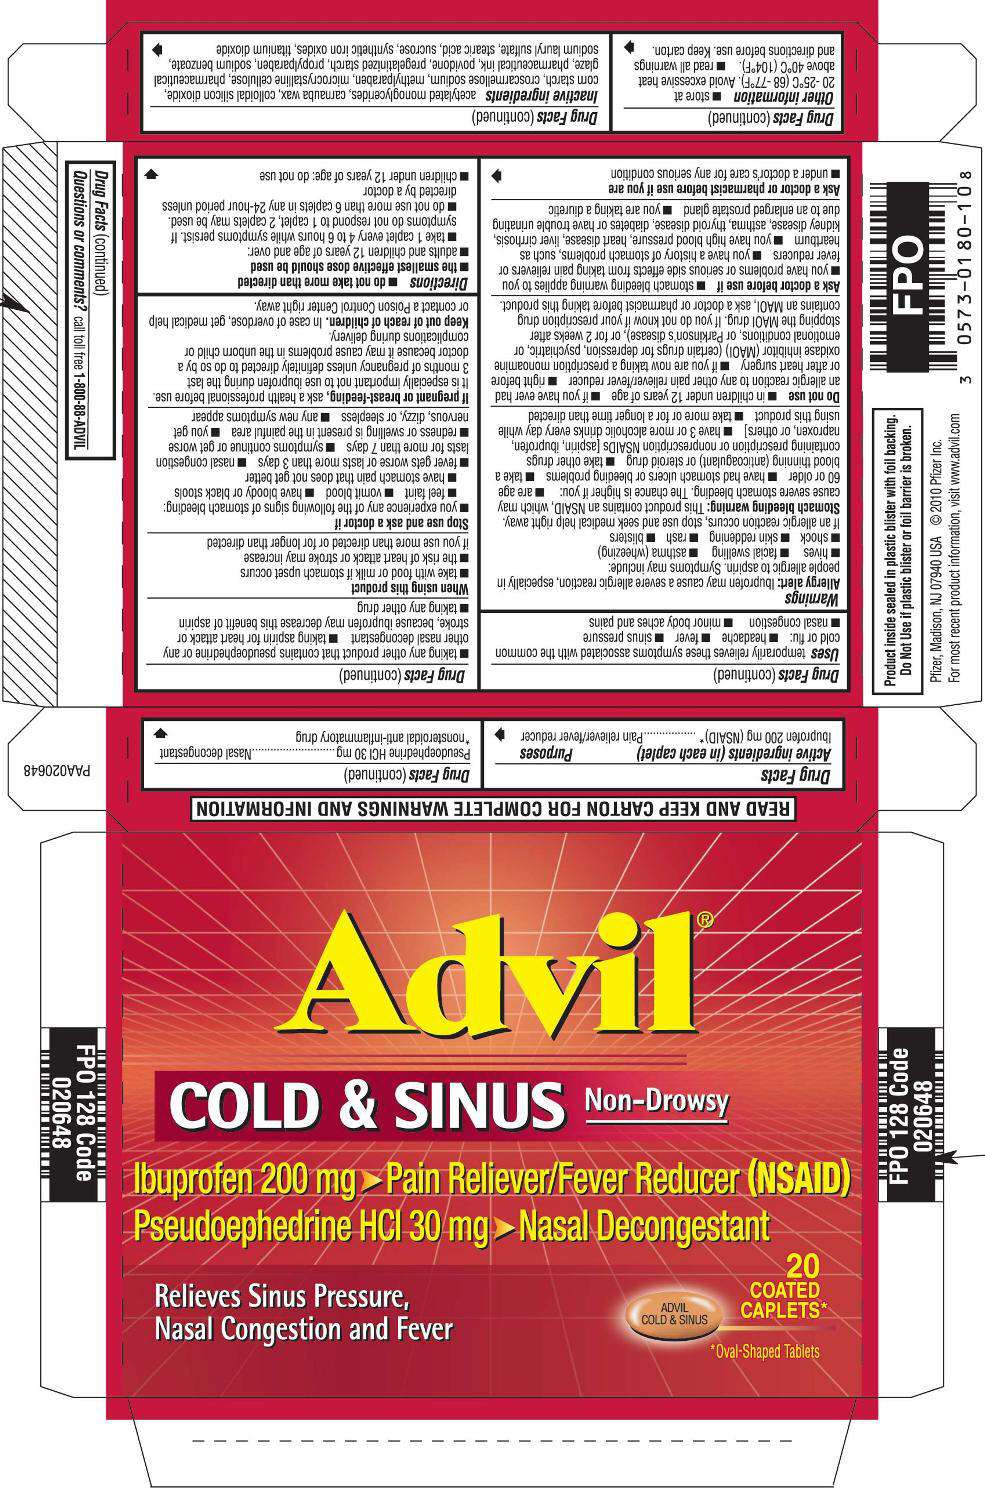 ADVIL COLD AND SINUS